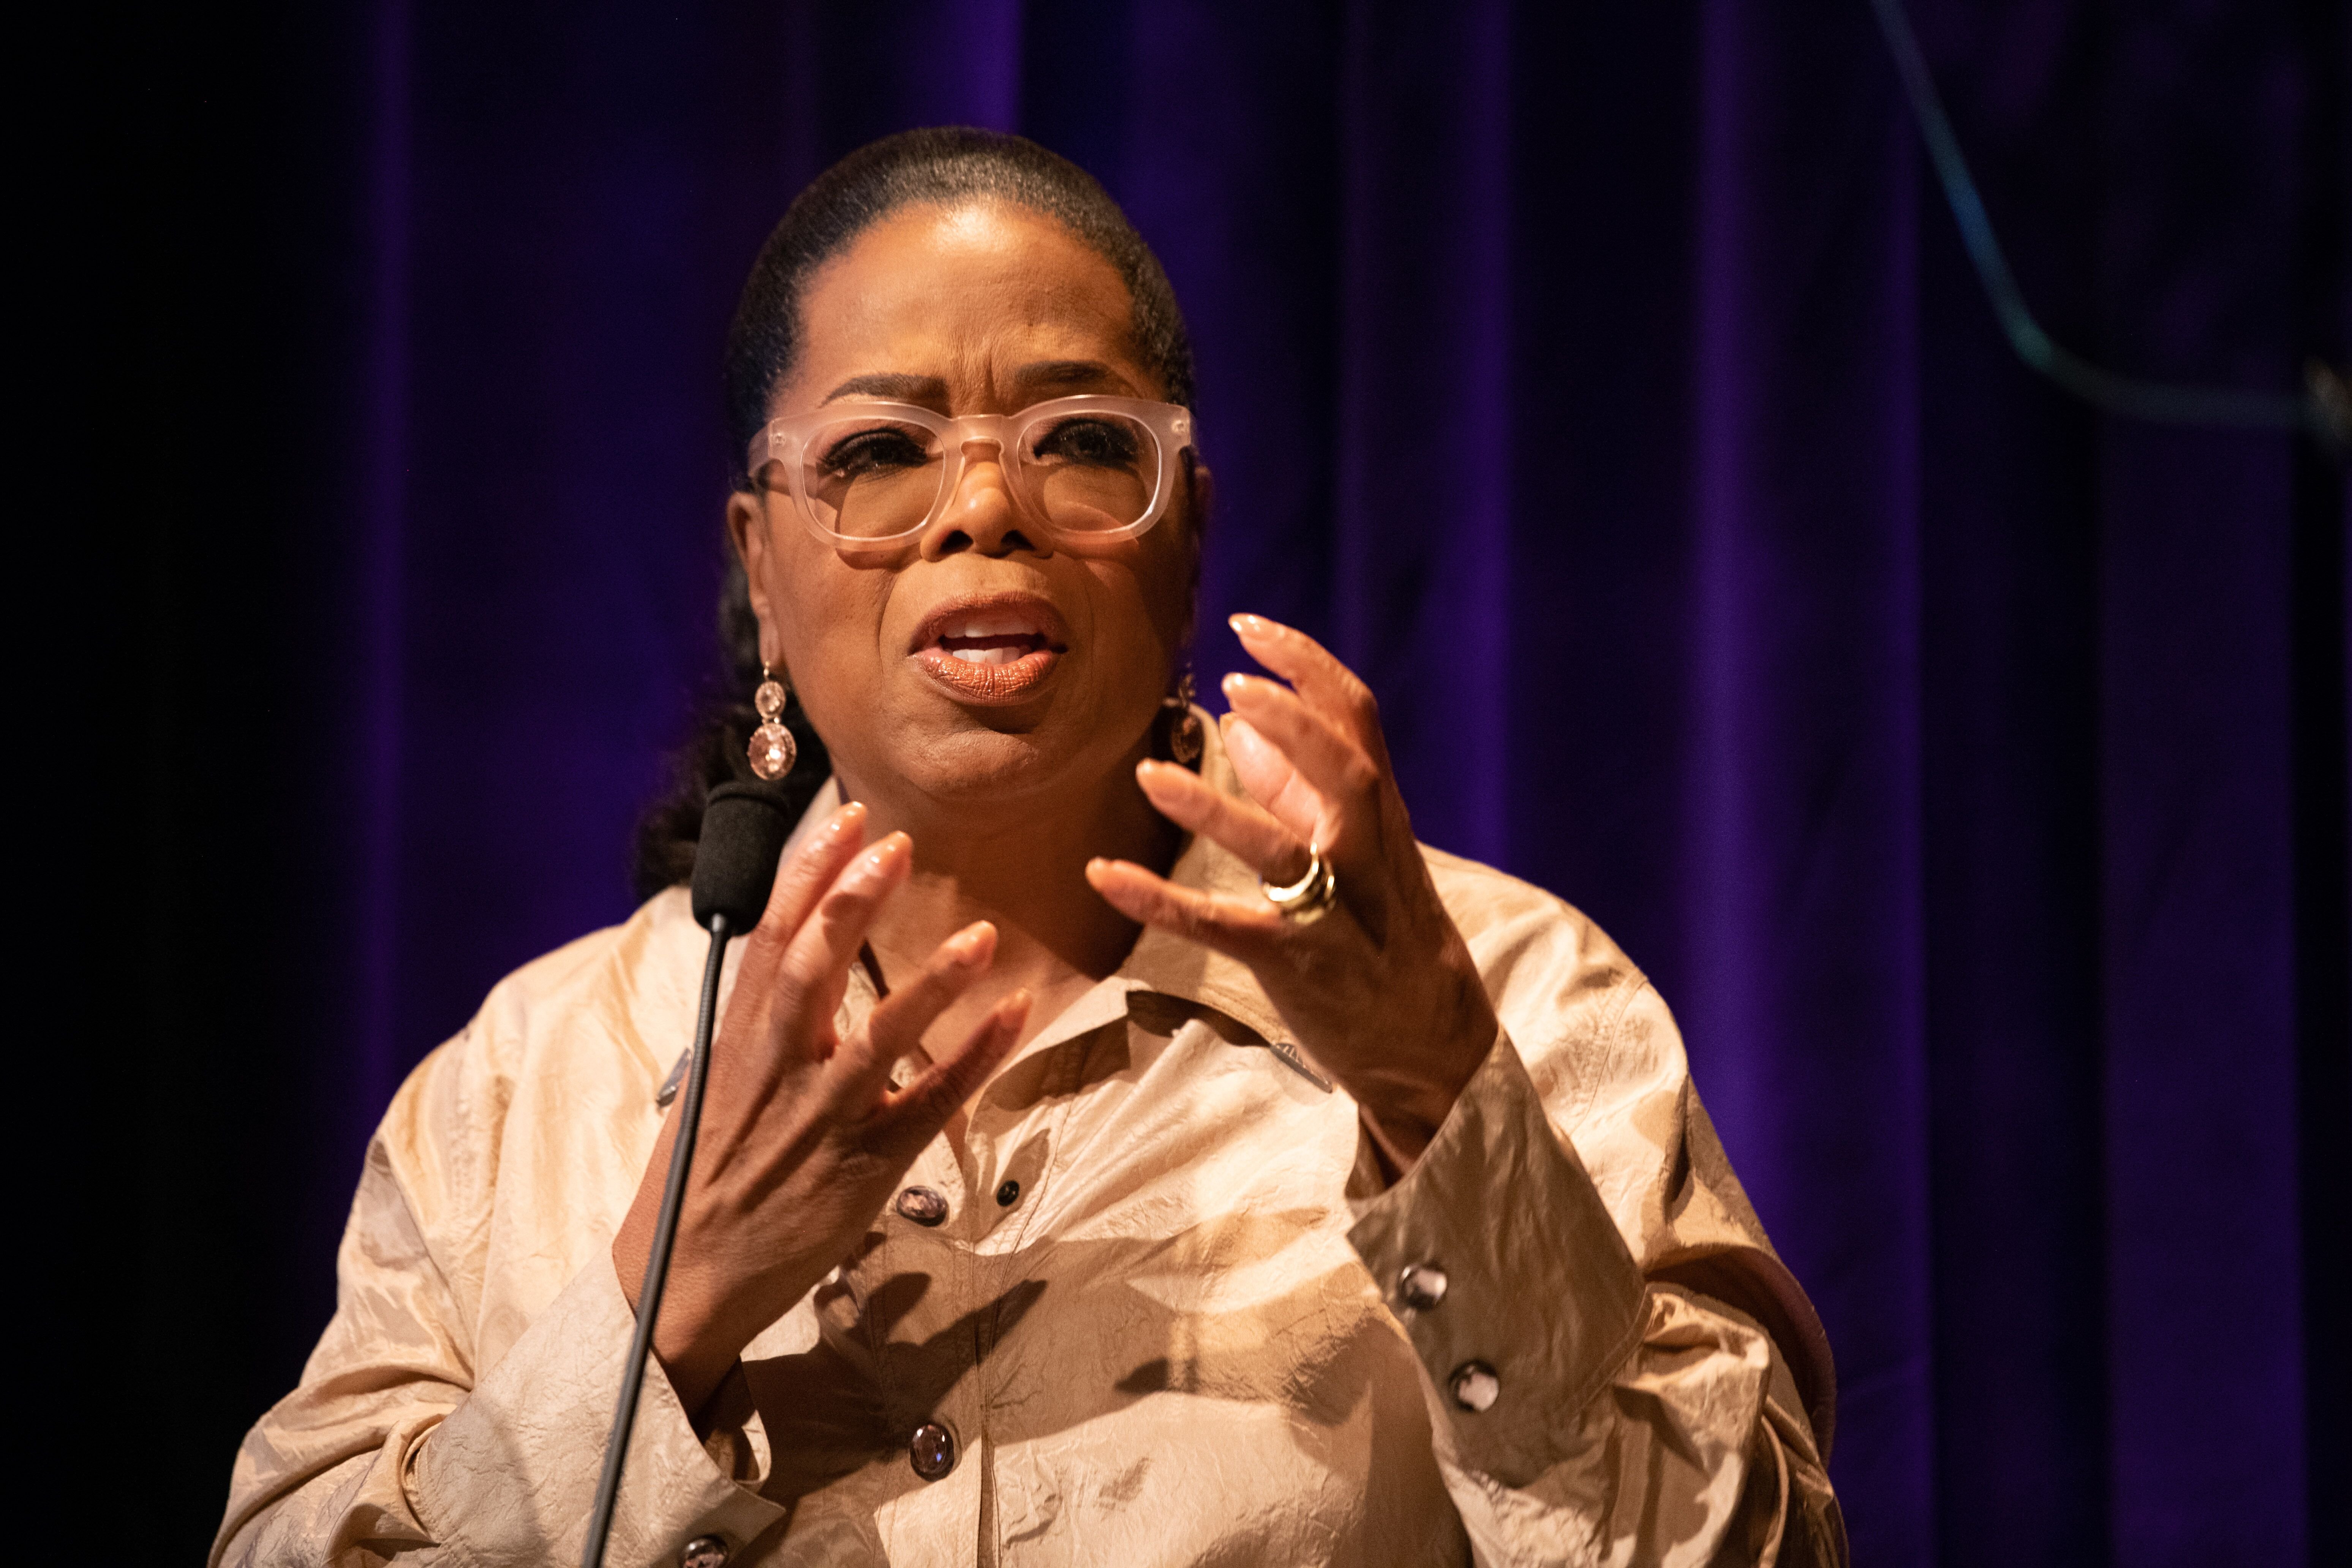 Oprah Winfrey speaks onstage at the Women's E3 Summit | Source: Getty Images